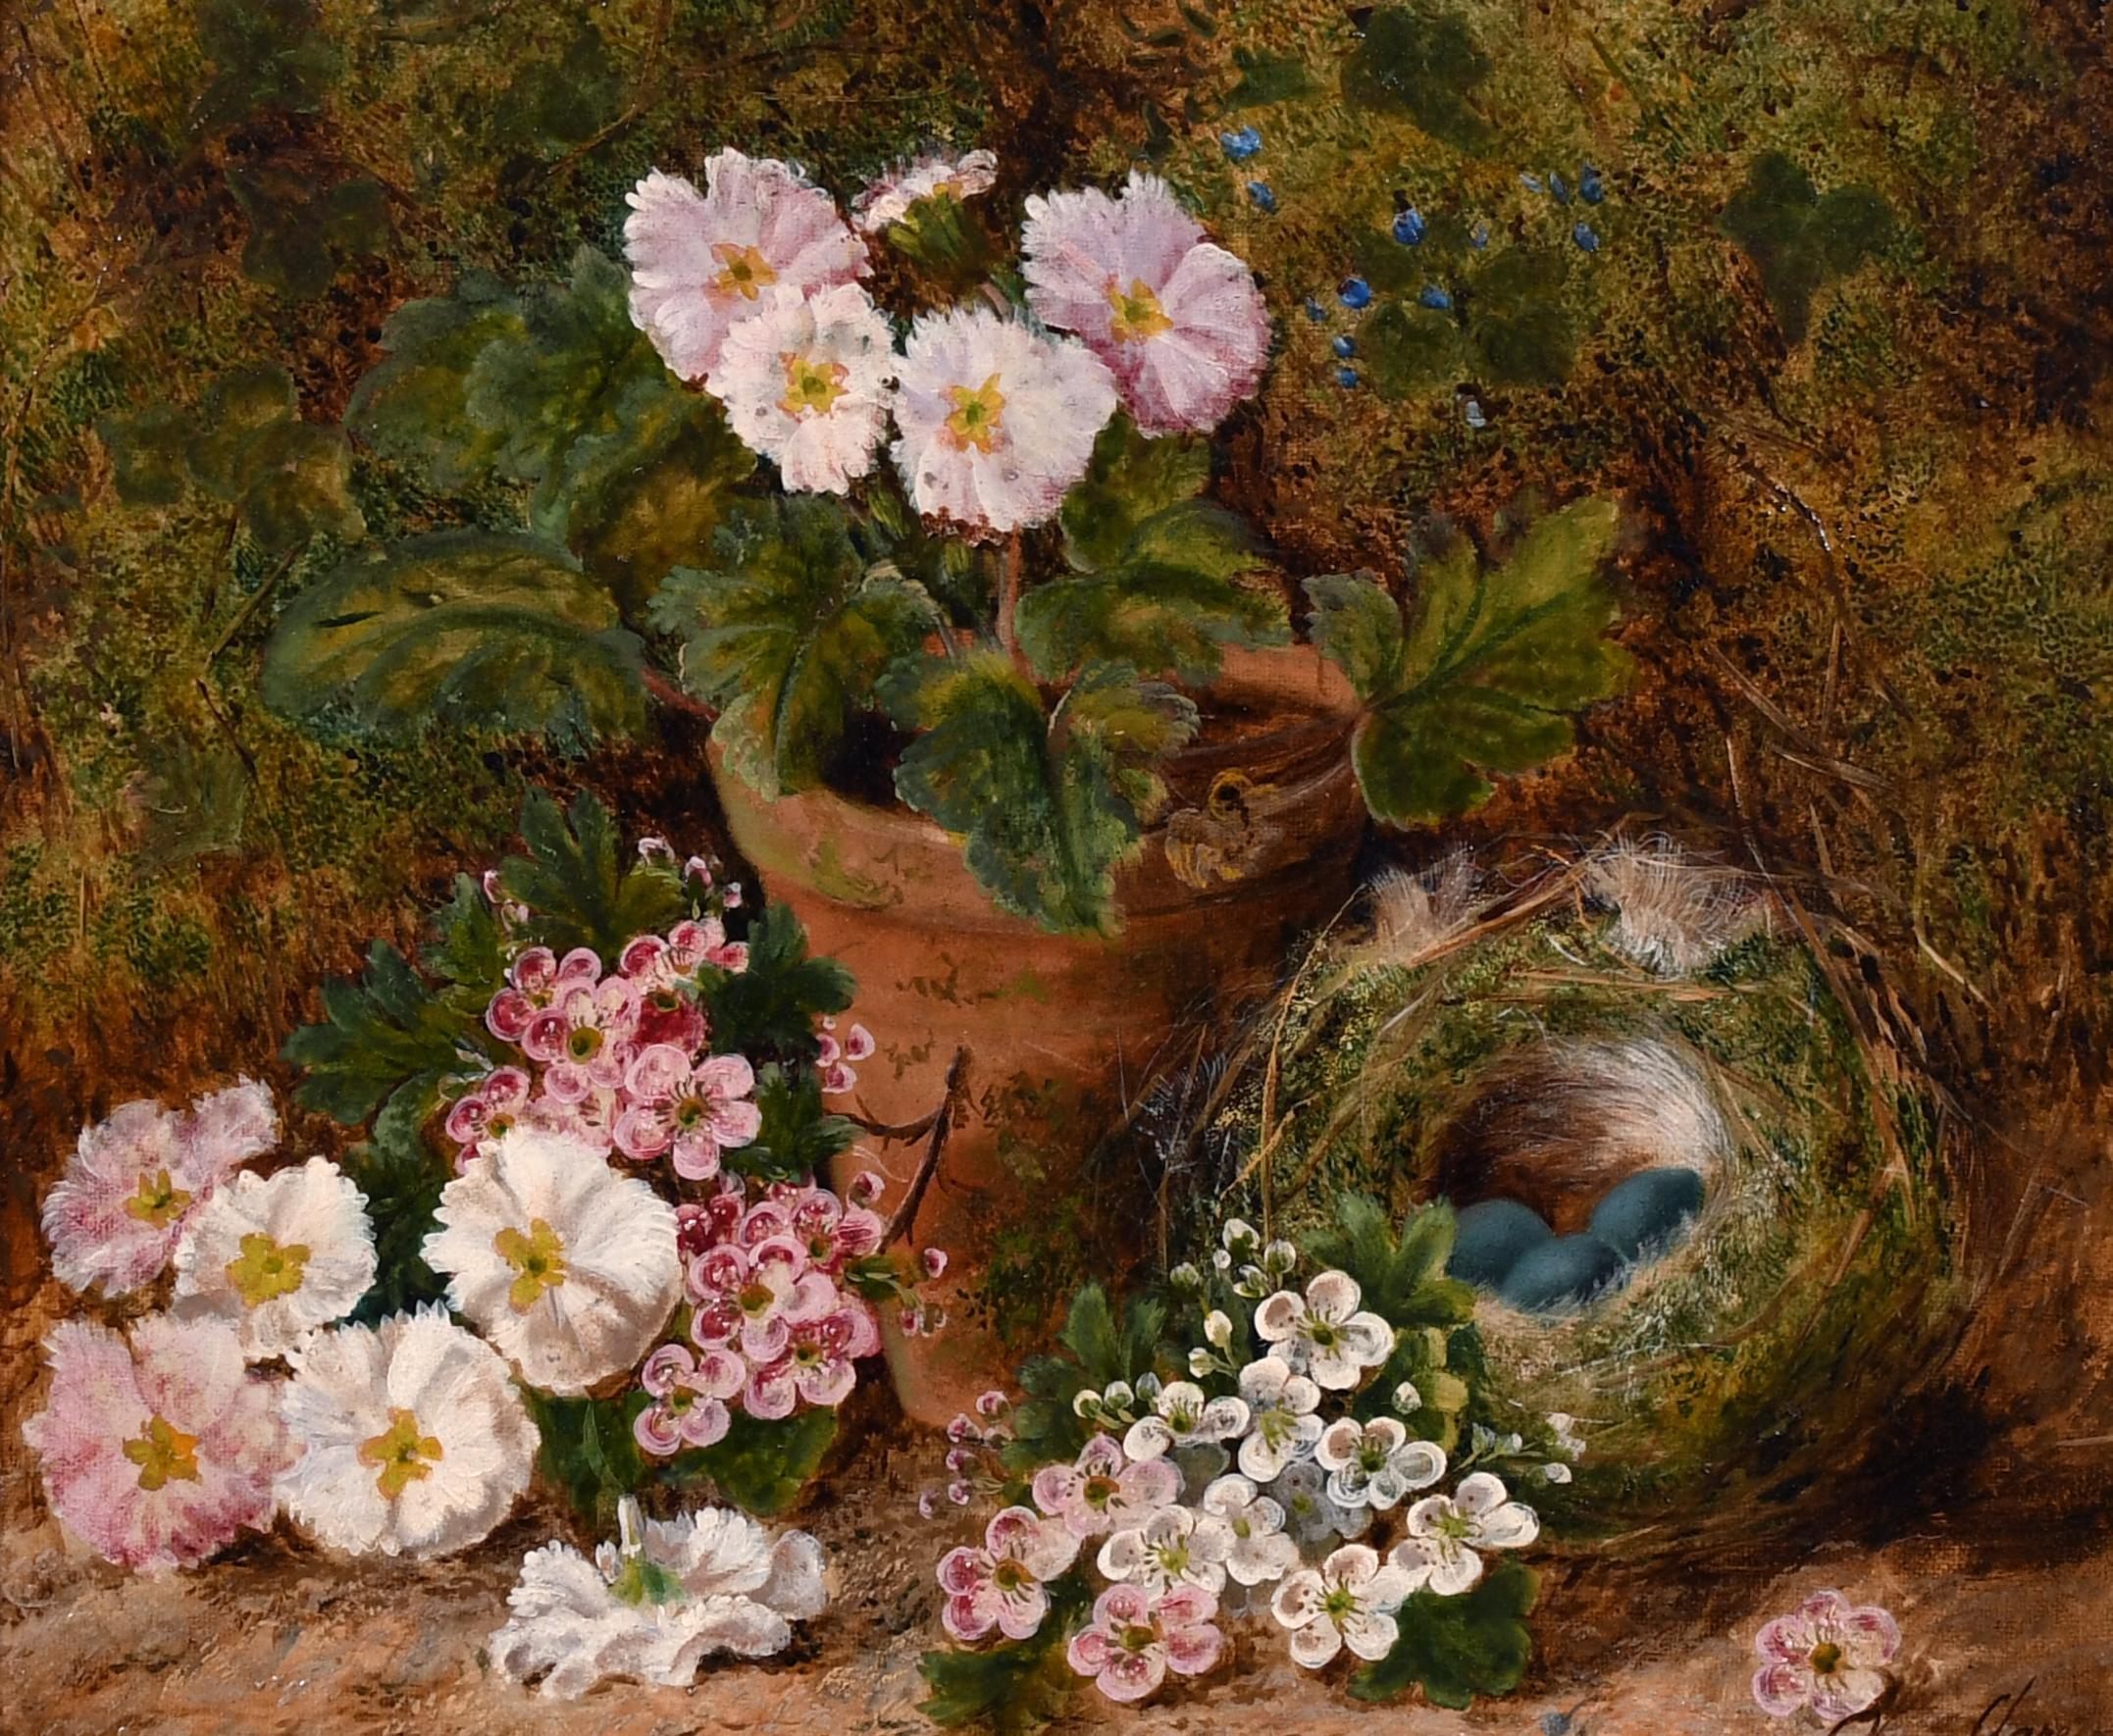 Still life of Bird's Nest and Flowers on a Mossy Bank - Painting by Oliver Clare